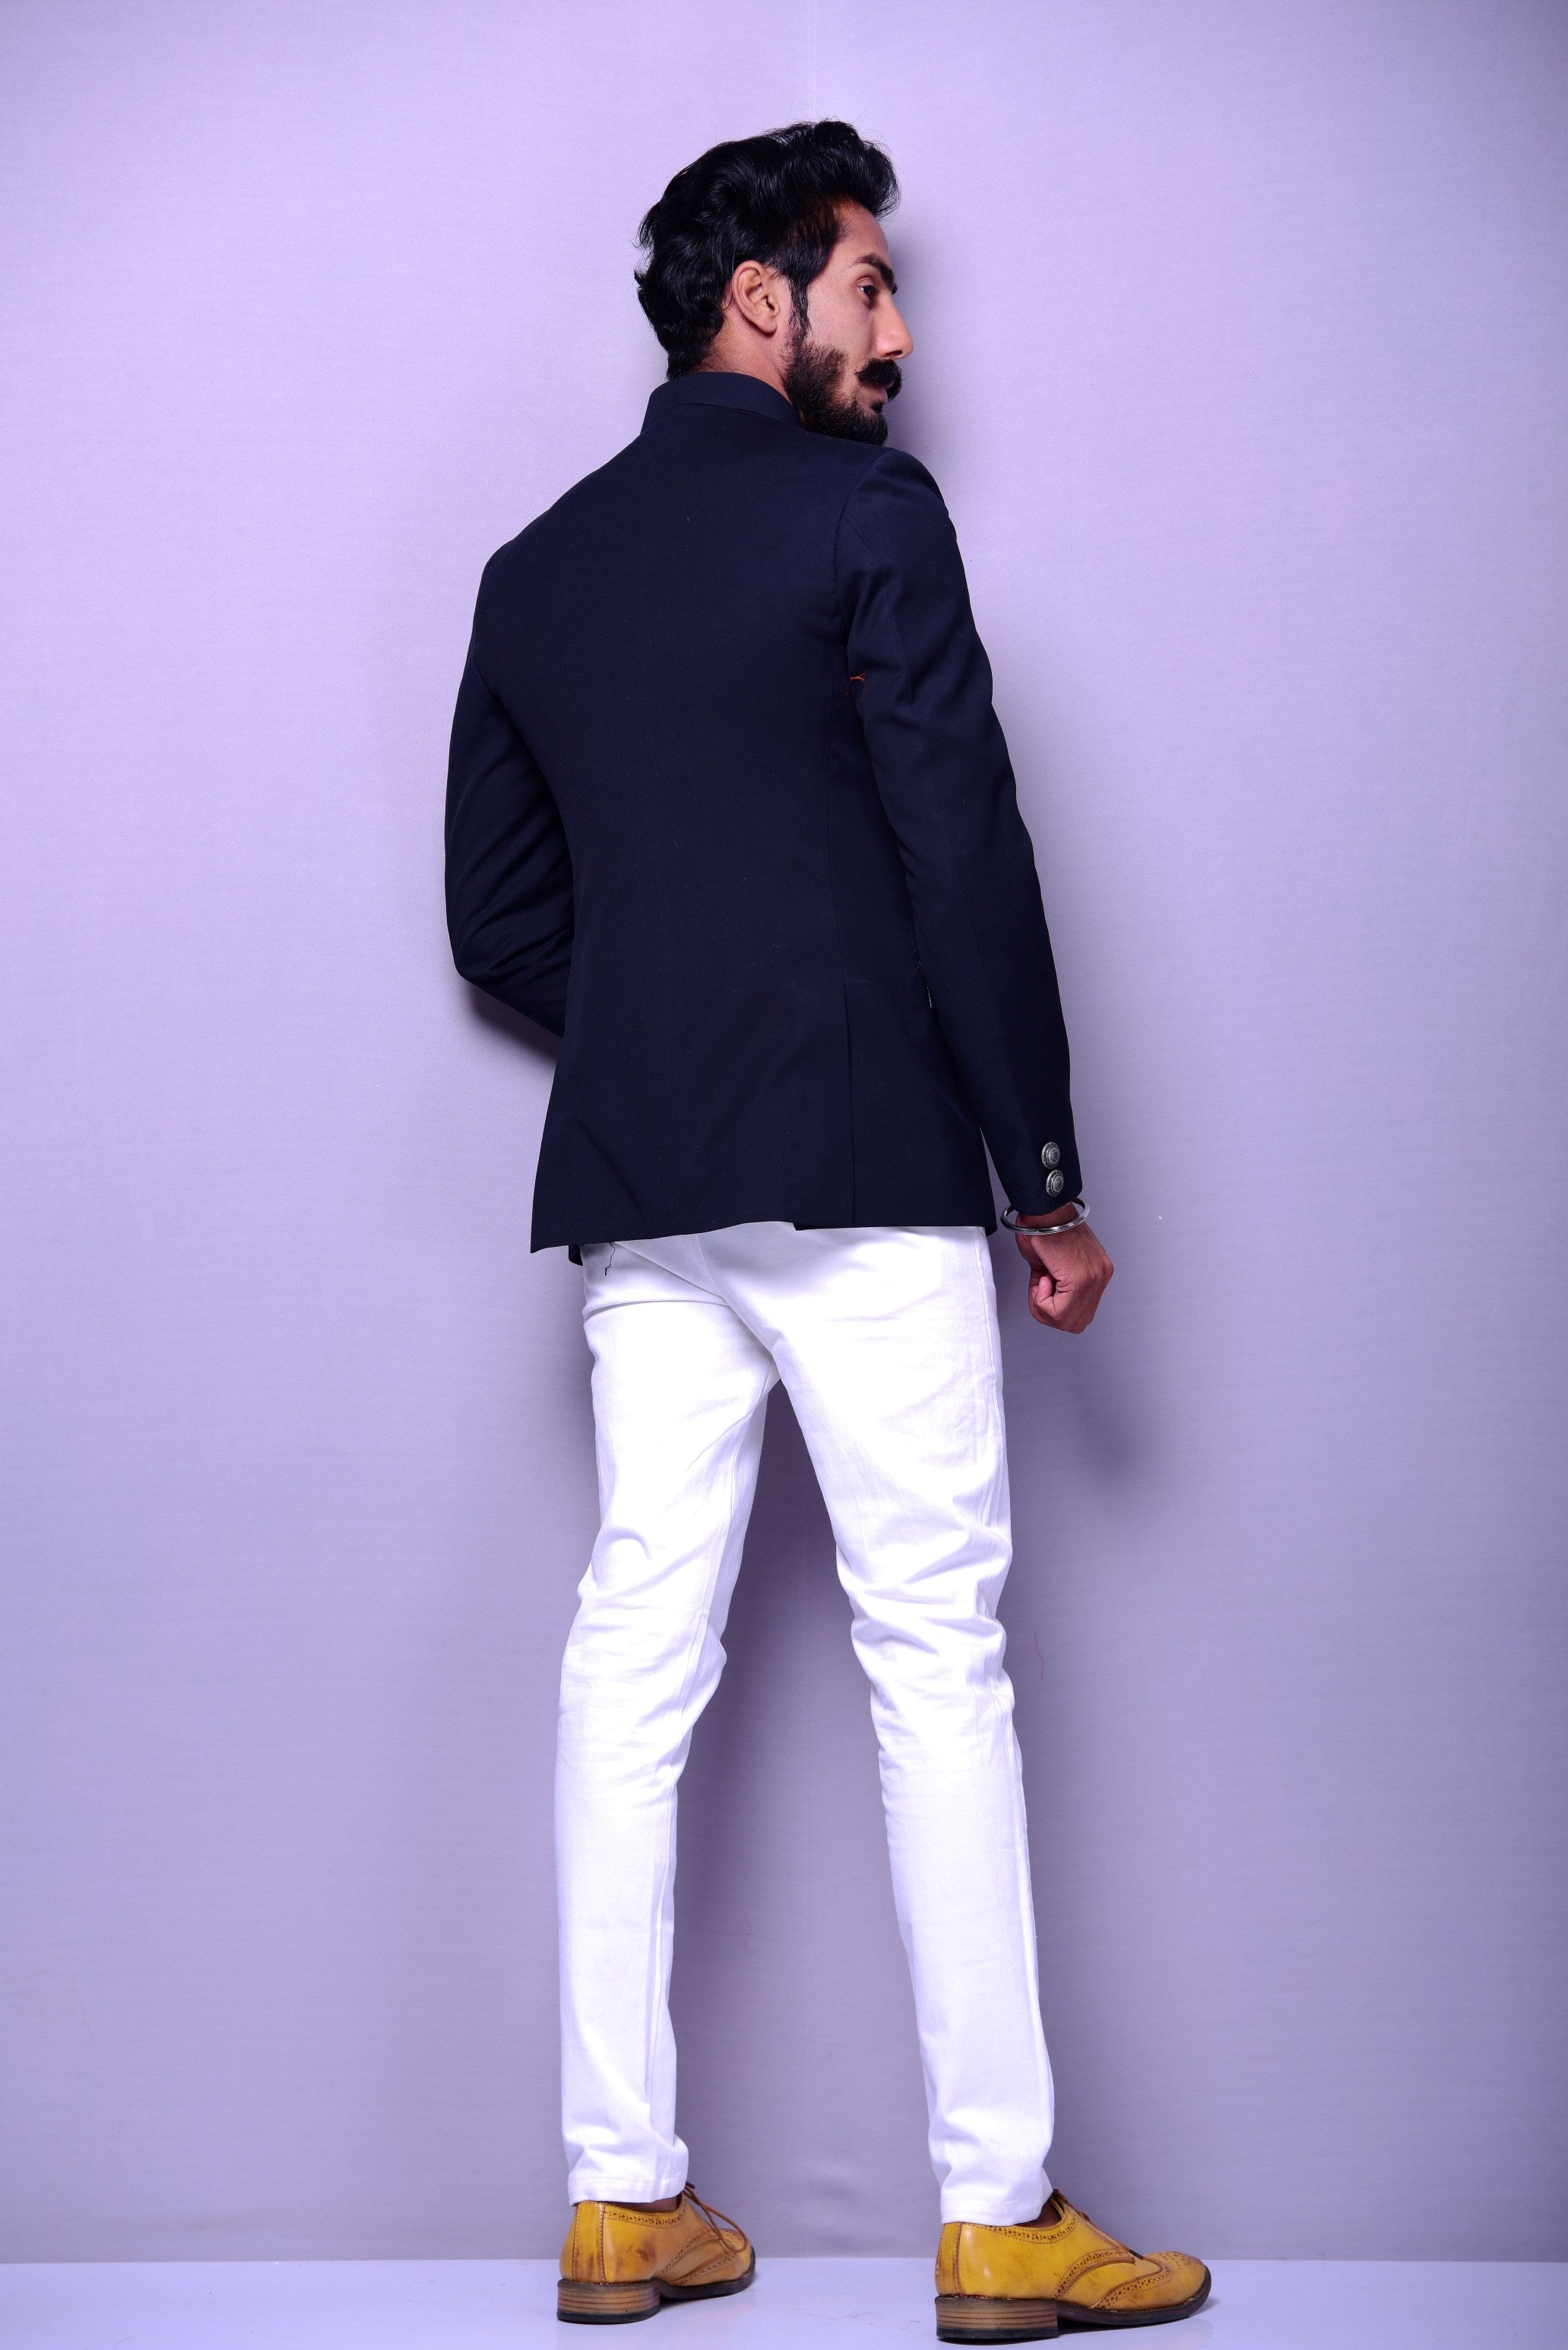 White Pants with Blue Jacket Dressy Outfits For Men After 40 (16 ideas &  outfits) | Lookastic